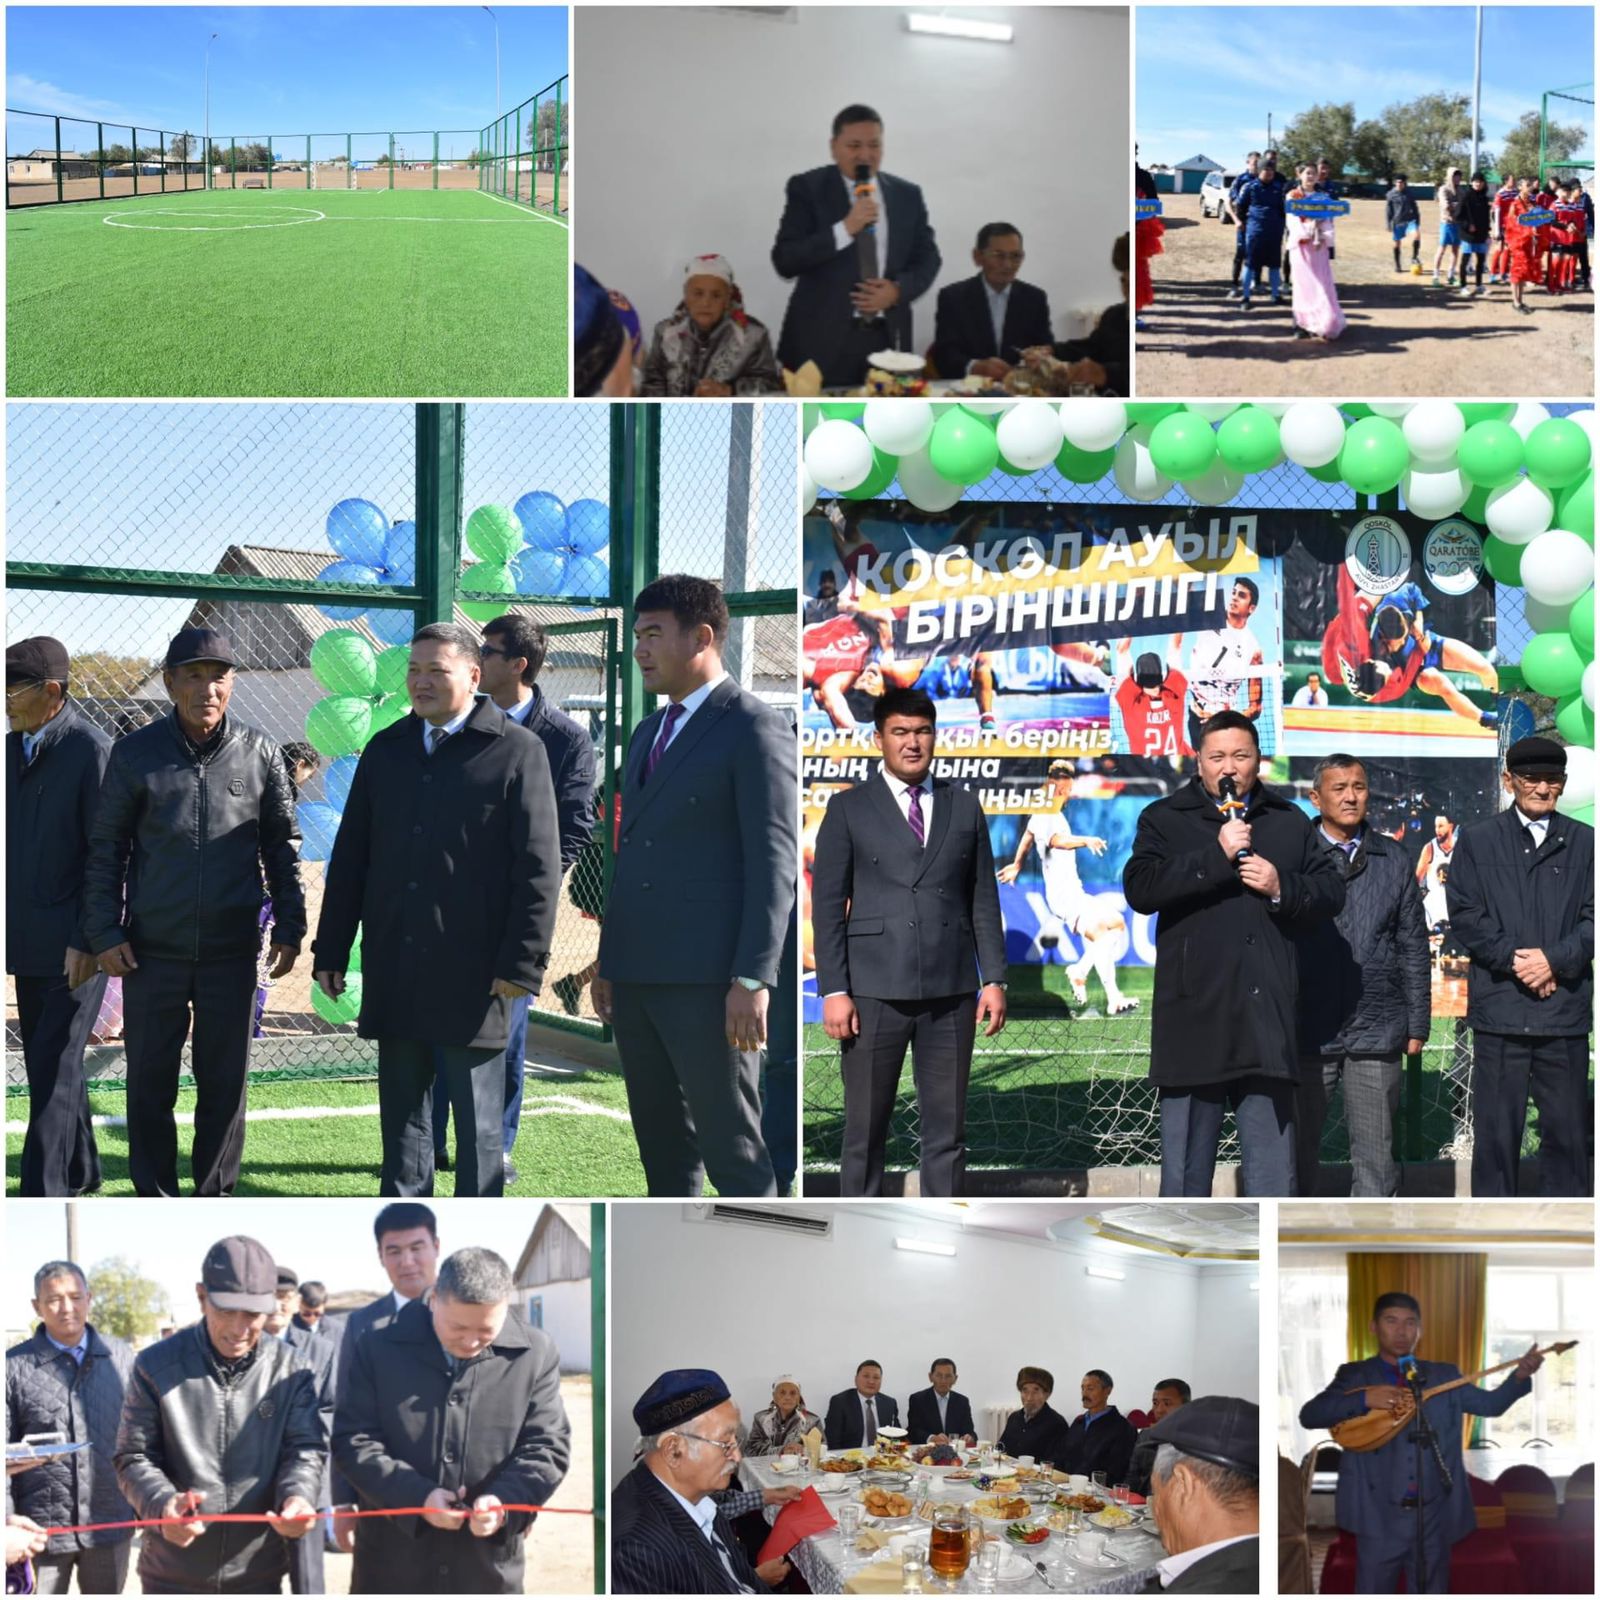 The grand opening of the sports ground took place in the Koskol rural district